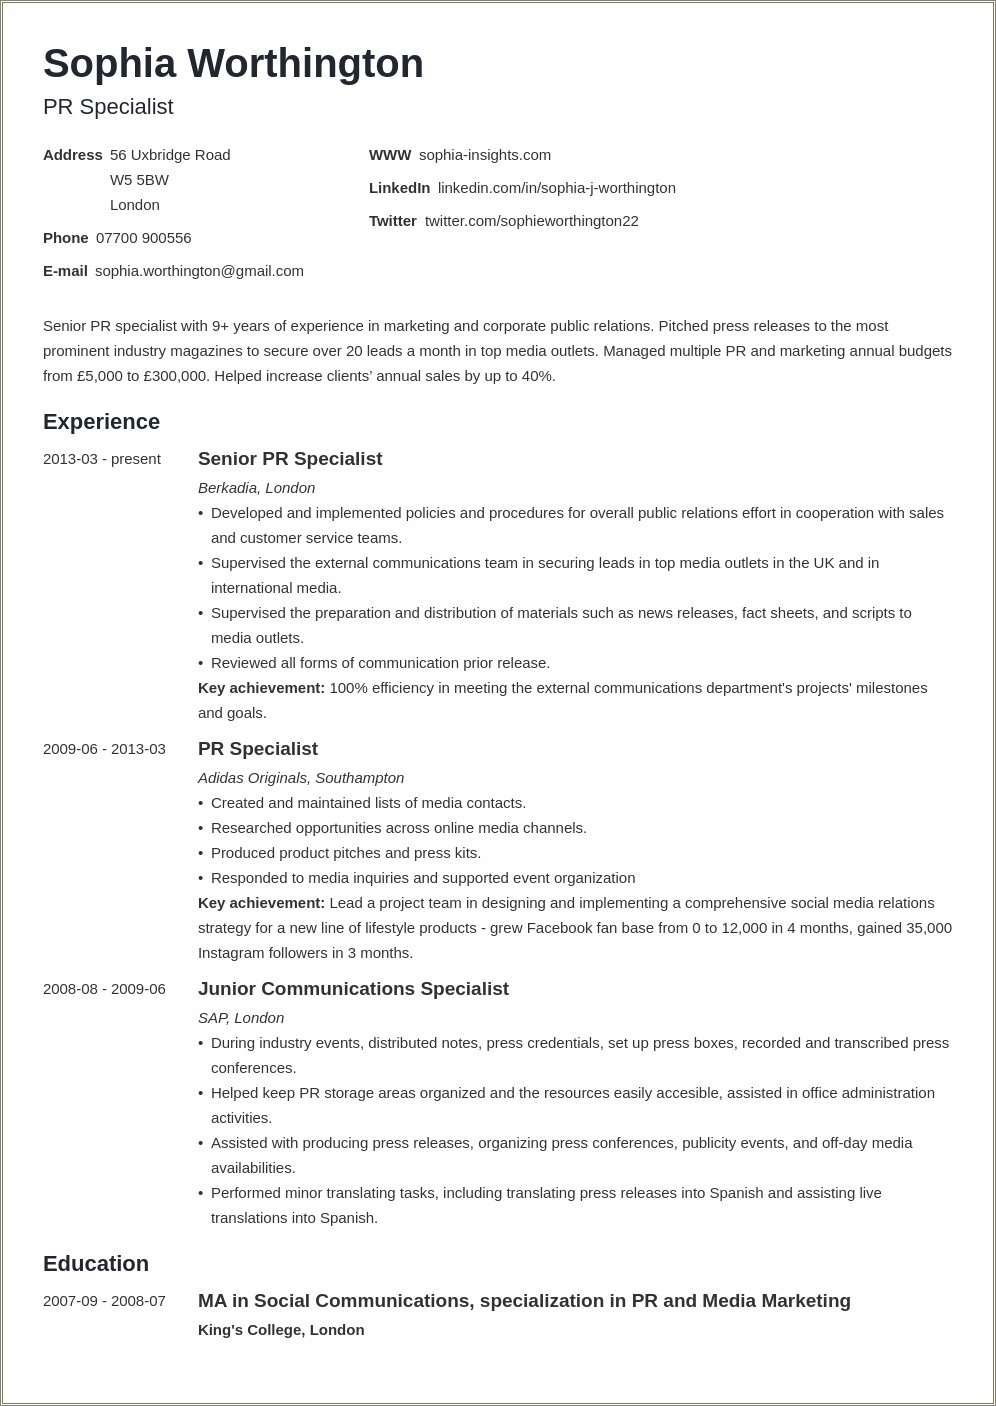 Different Skills And Abilities For Resume